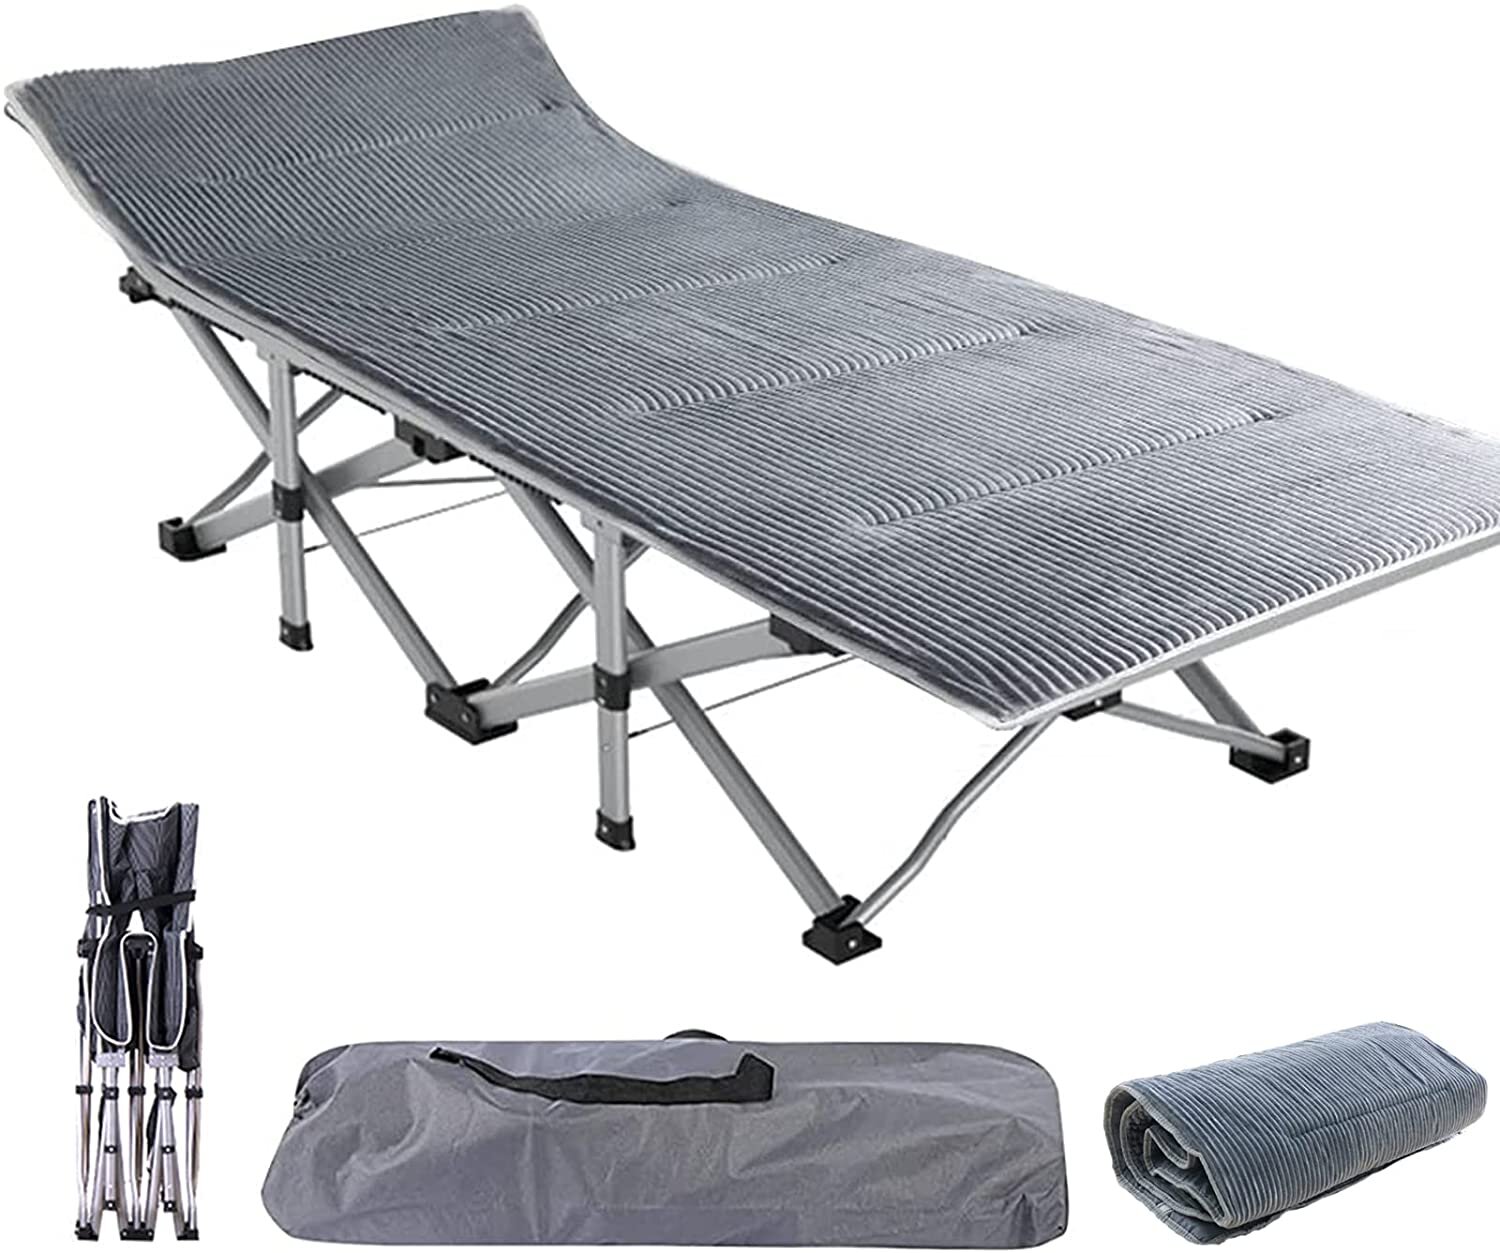 NEW Folding Camping Bed Outdoor Portable Military Cot Sleeping Hiking Travel USA